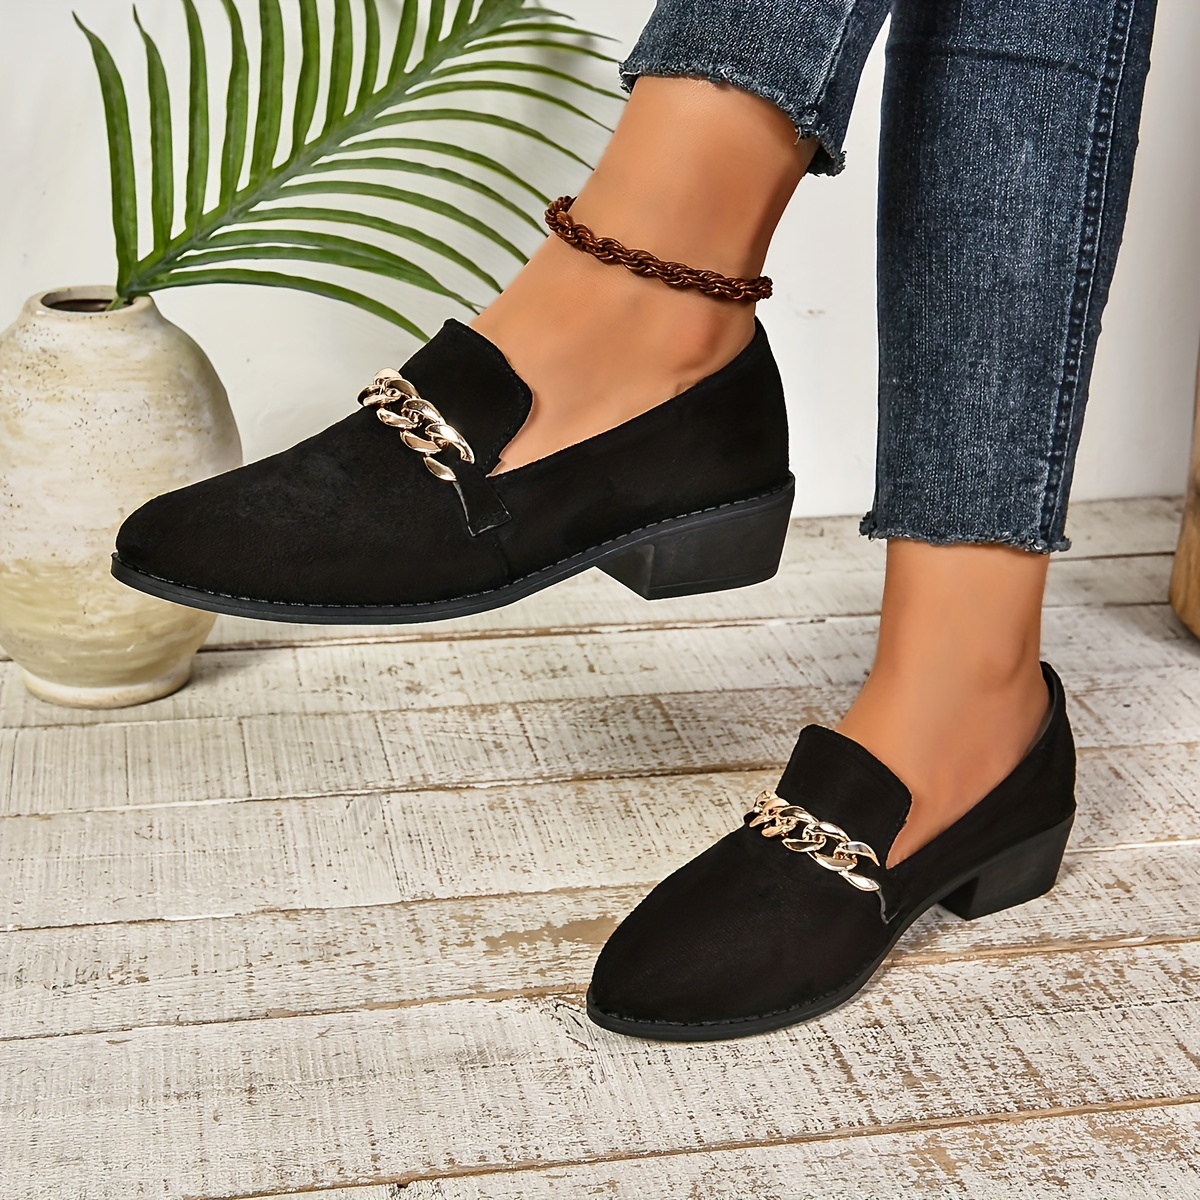 

Elegant Plus-size Women's Loafers With Chain Detail - Versatile, Lightweight & Comfortable Slip-on Shoes For All Seasons